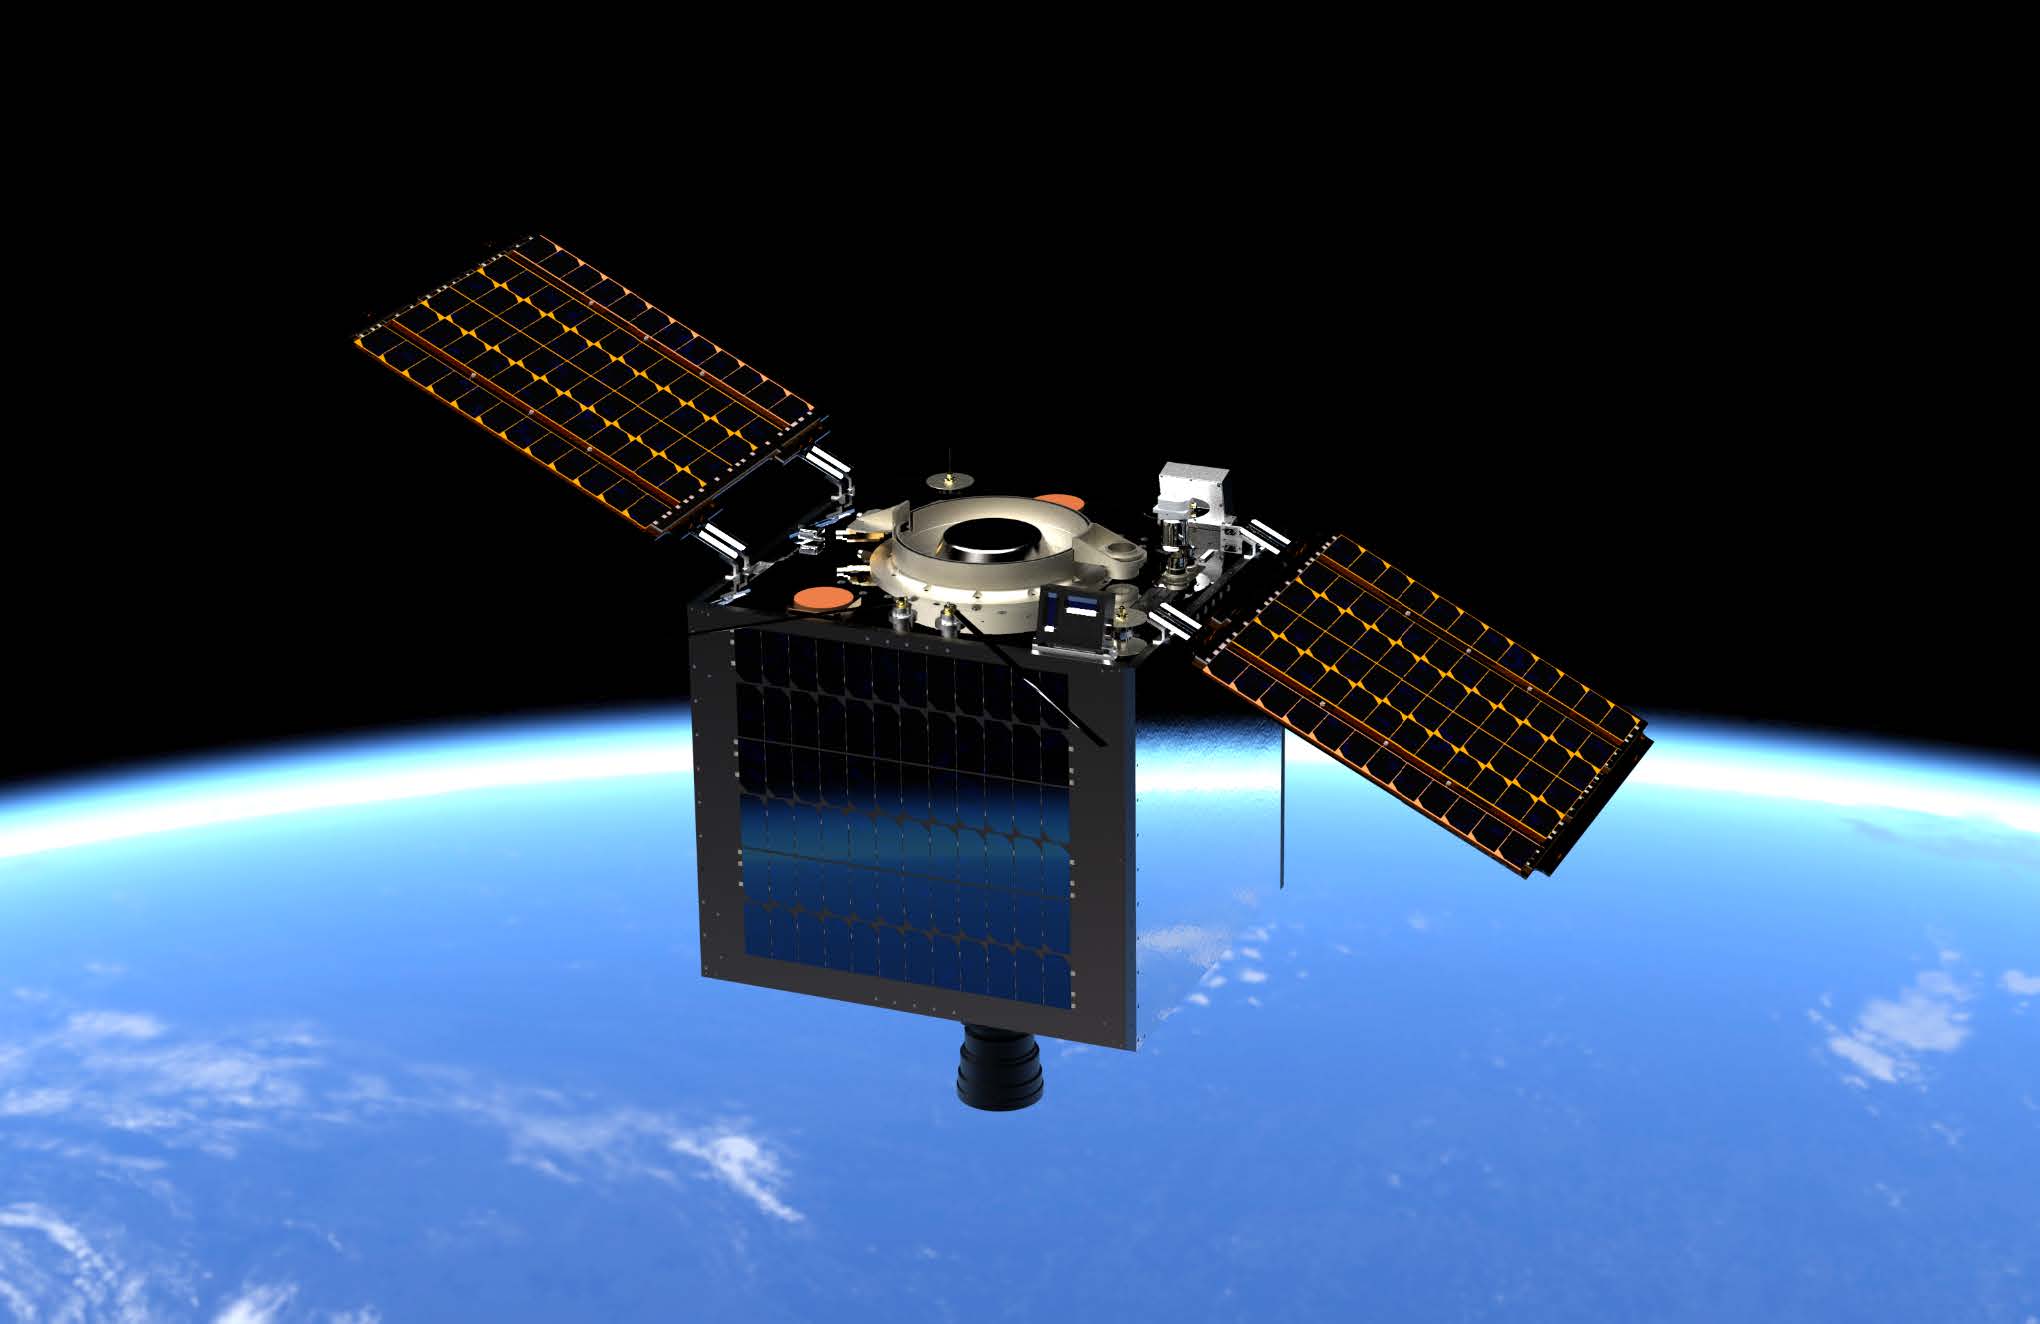 3D renders of the MULA satellite. Photos courtesy of SSTL.